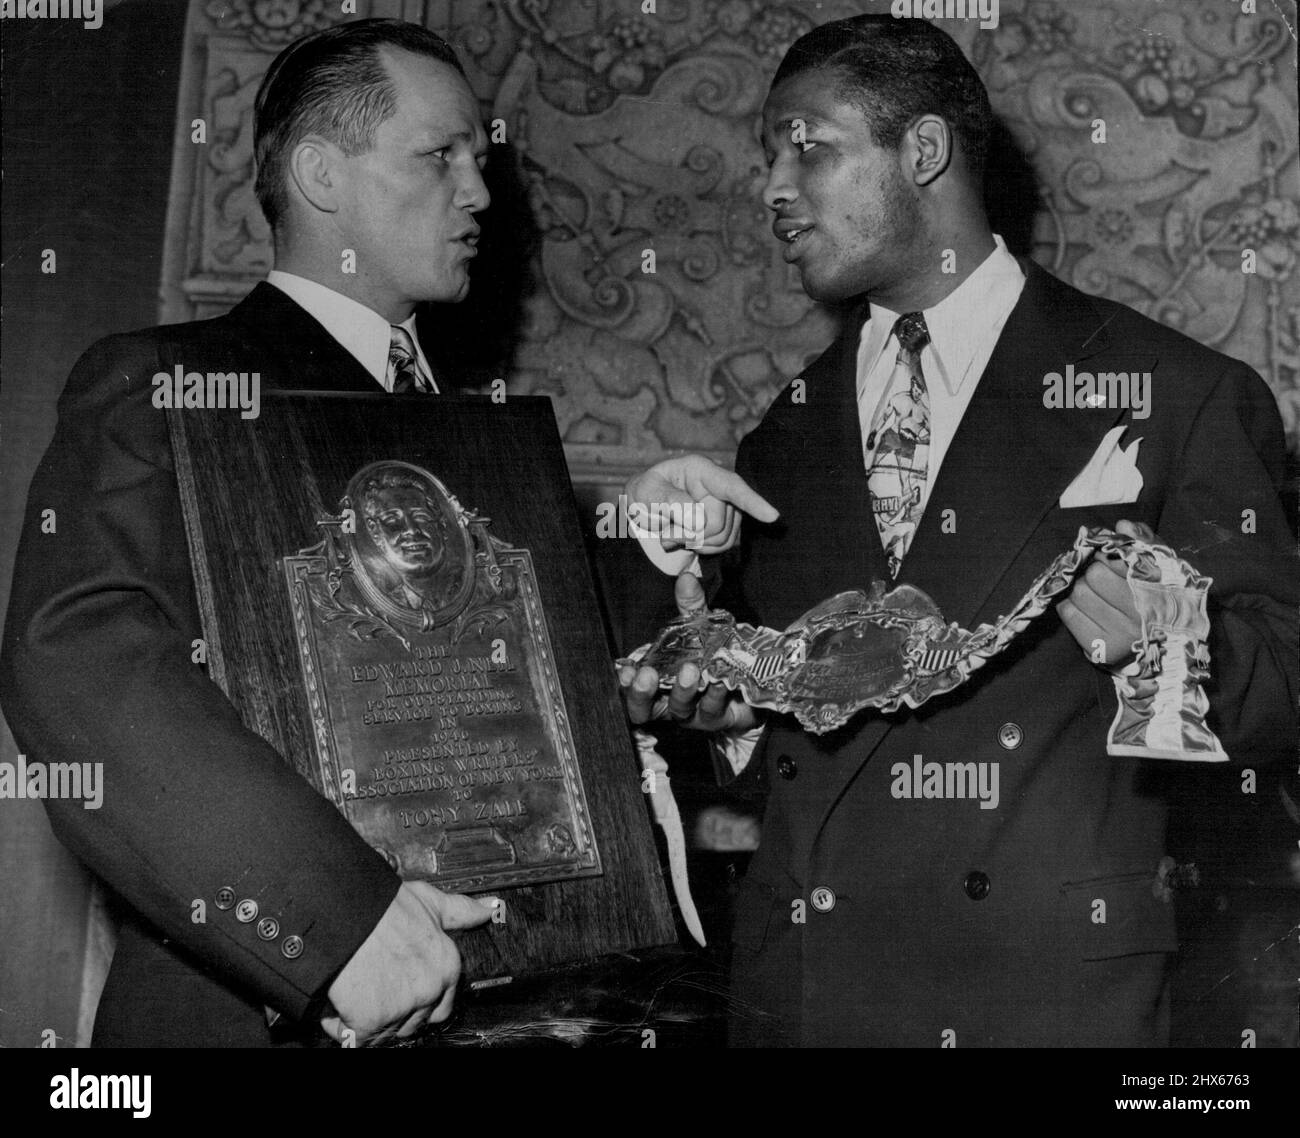 Receive Awards From Boxing Writers -- Tony Zale (left), middle weight boxing champion, holds the Edward J. Neil Plaque and Ray (Sugar) Robinson. welterweight champ, holds a belt Awarded Jan.22 at the annual dinner of the Boxing writers Association of New York city. The Neil award was made in memory of Edward J. Neil, Associated Press boxing writer and war correspondent, killed in the Spanish revolution. The belt held by Robinson was awarded by Ring Magazine. January 22, 1947. (Photo by Associate Stock Photo